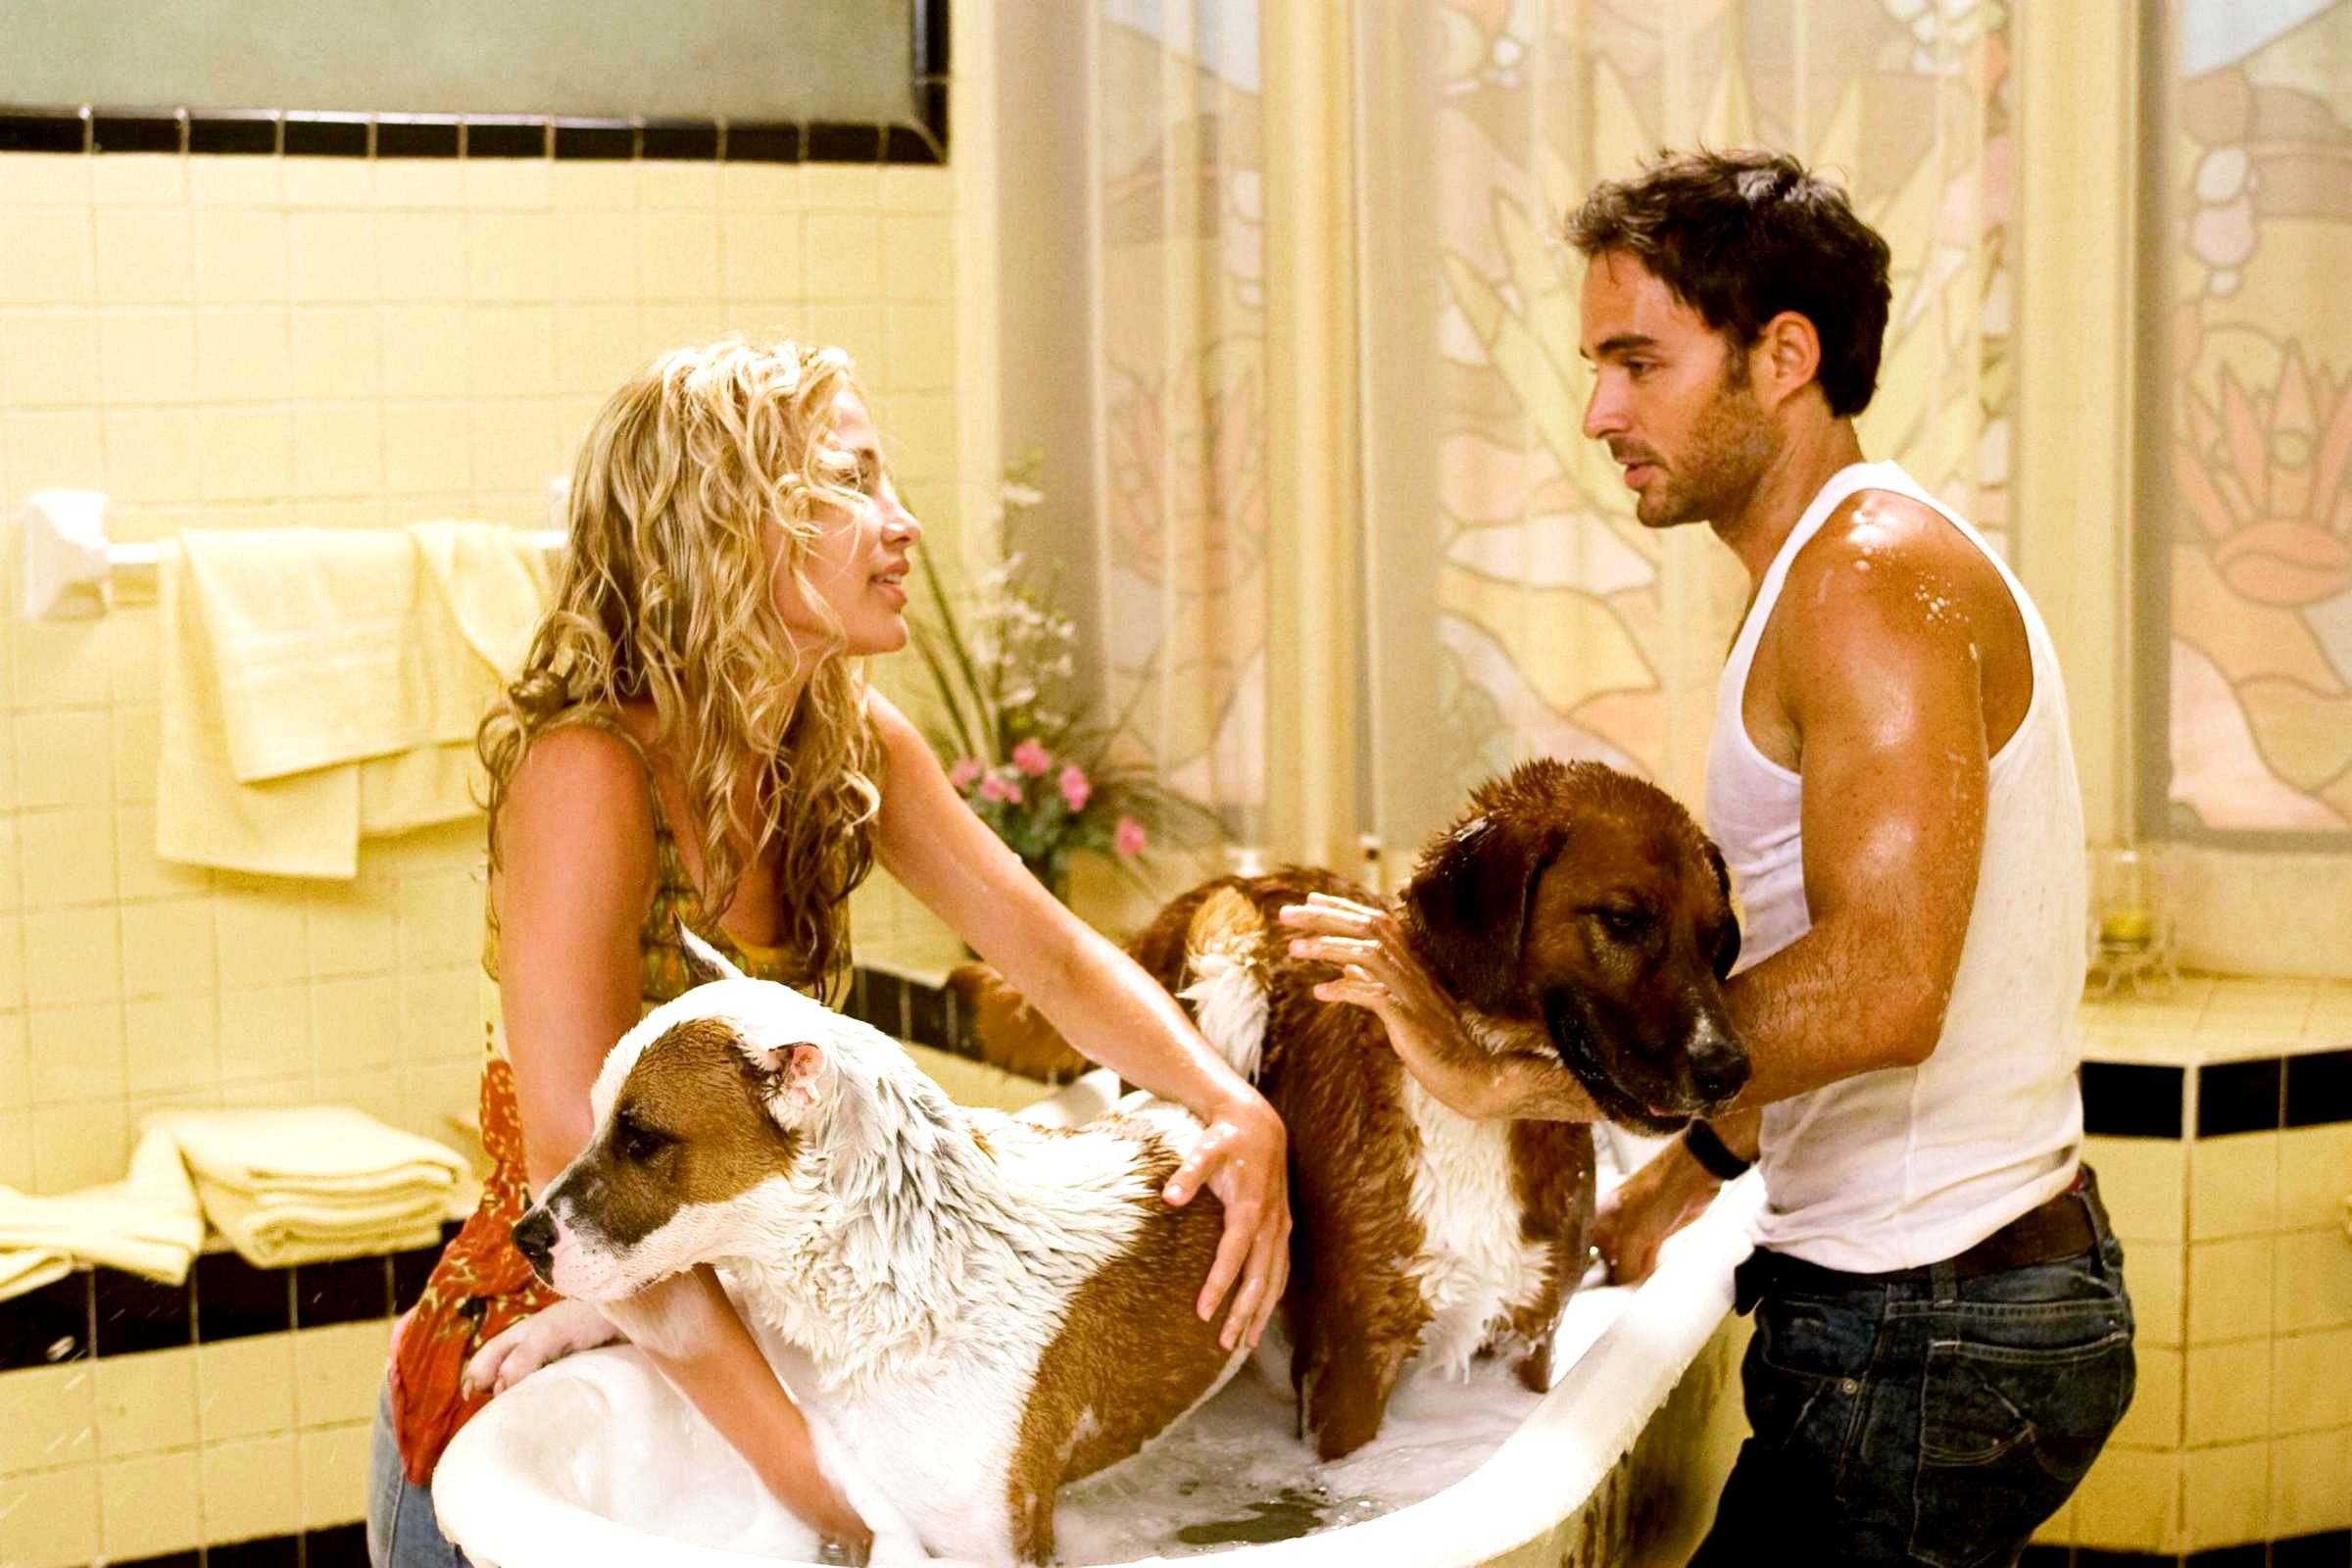 Piper Perabo and Manolo Cardona (Sam) in Walt Disney Pictures' Beverly Hills Chihuahua (2008). Photo credit by Daniel Daza.